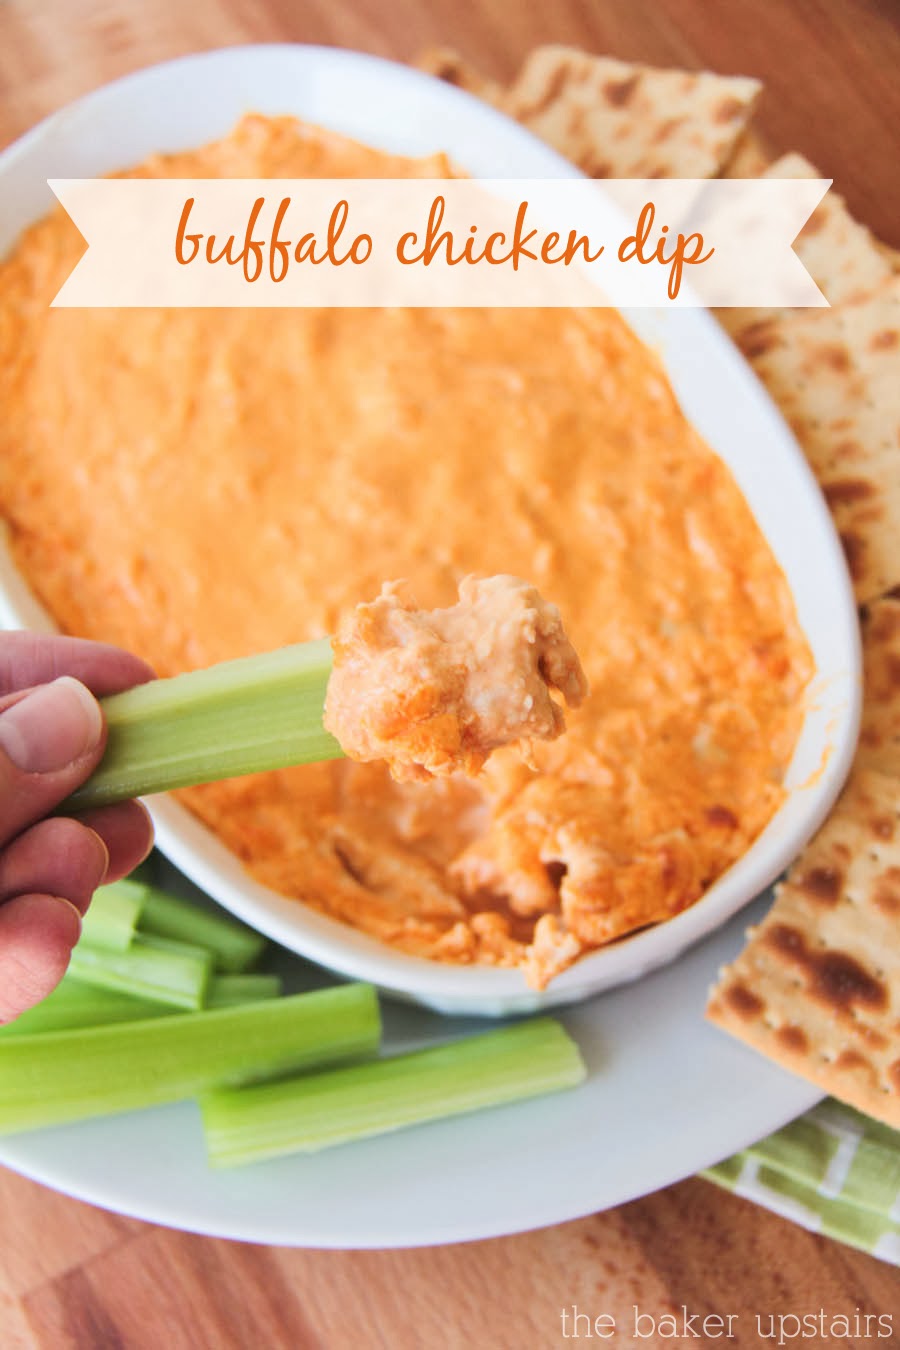 This delicious cheesy and spicy buffalo chicken dip is so easy to make and is a hit at any party!